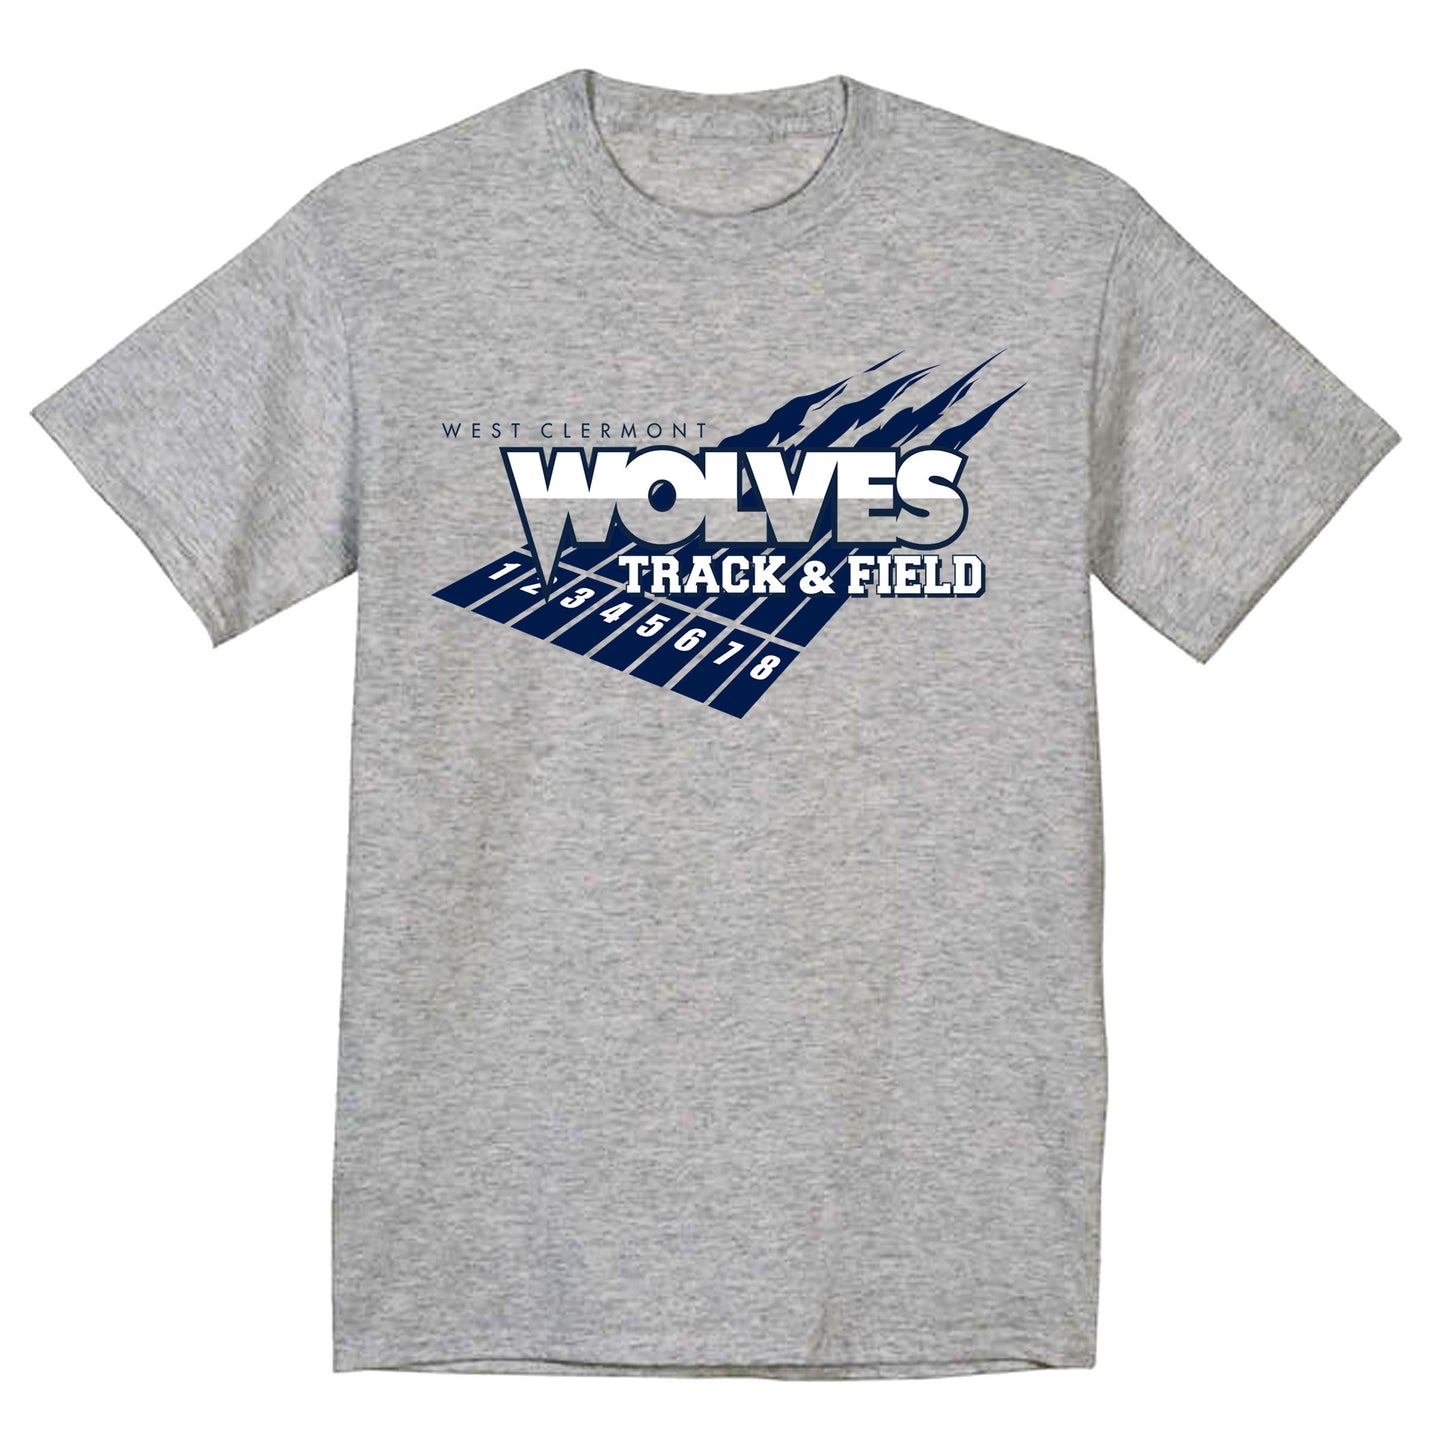 WOLVES Track & FIeld on GRAY